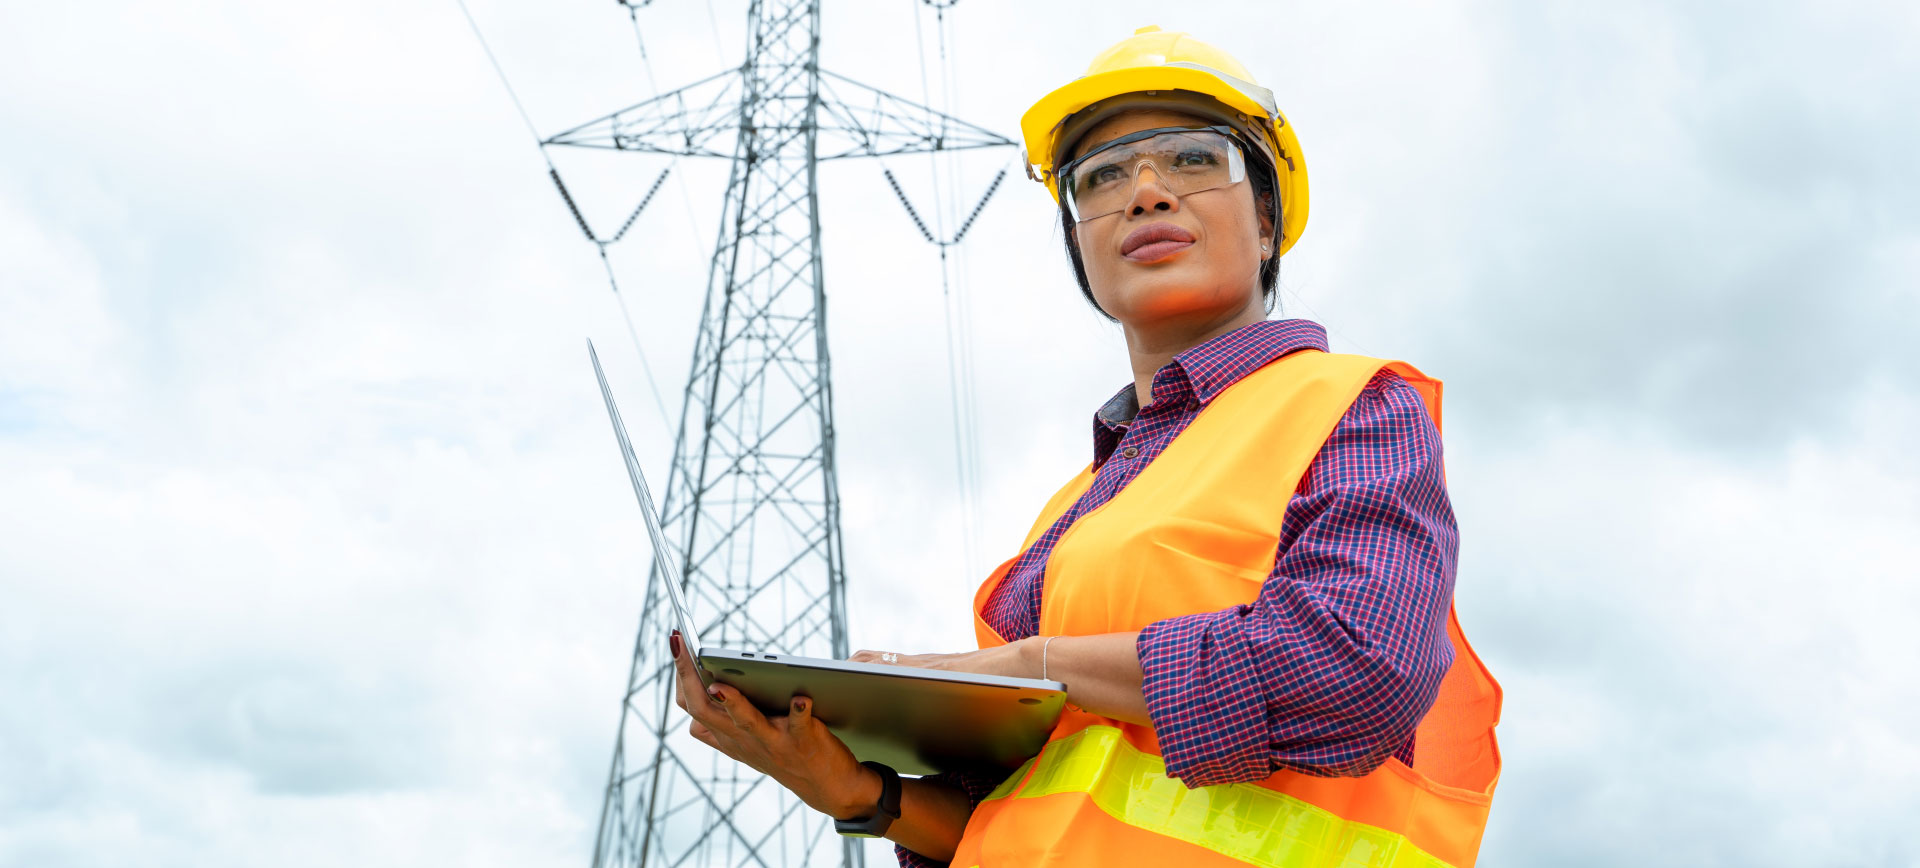 First Nations women are involved in a major transmission line